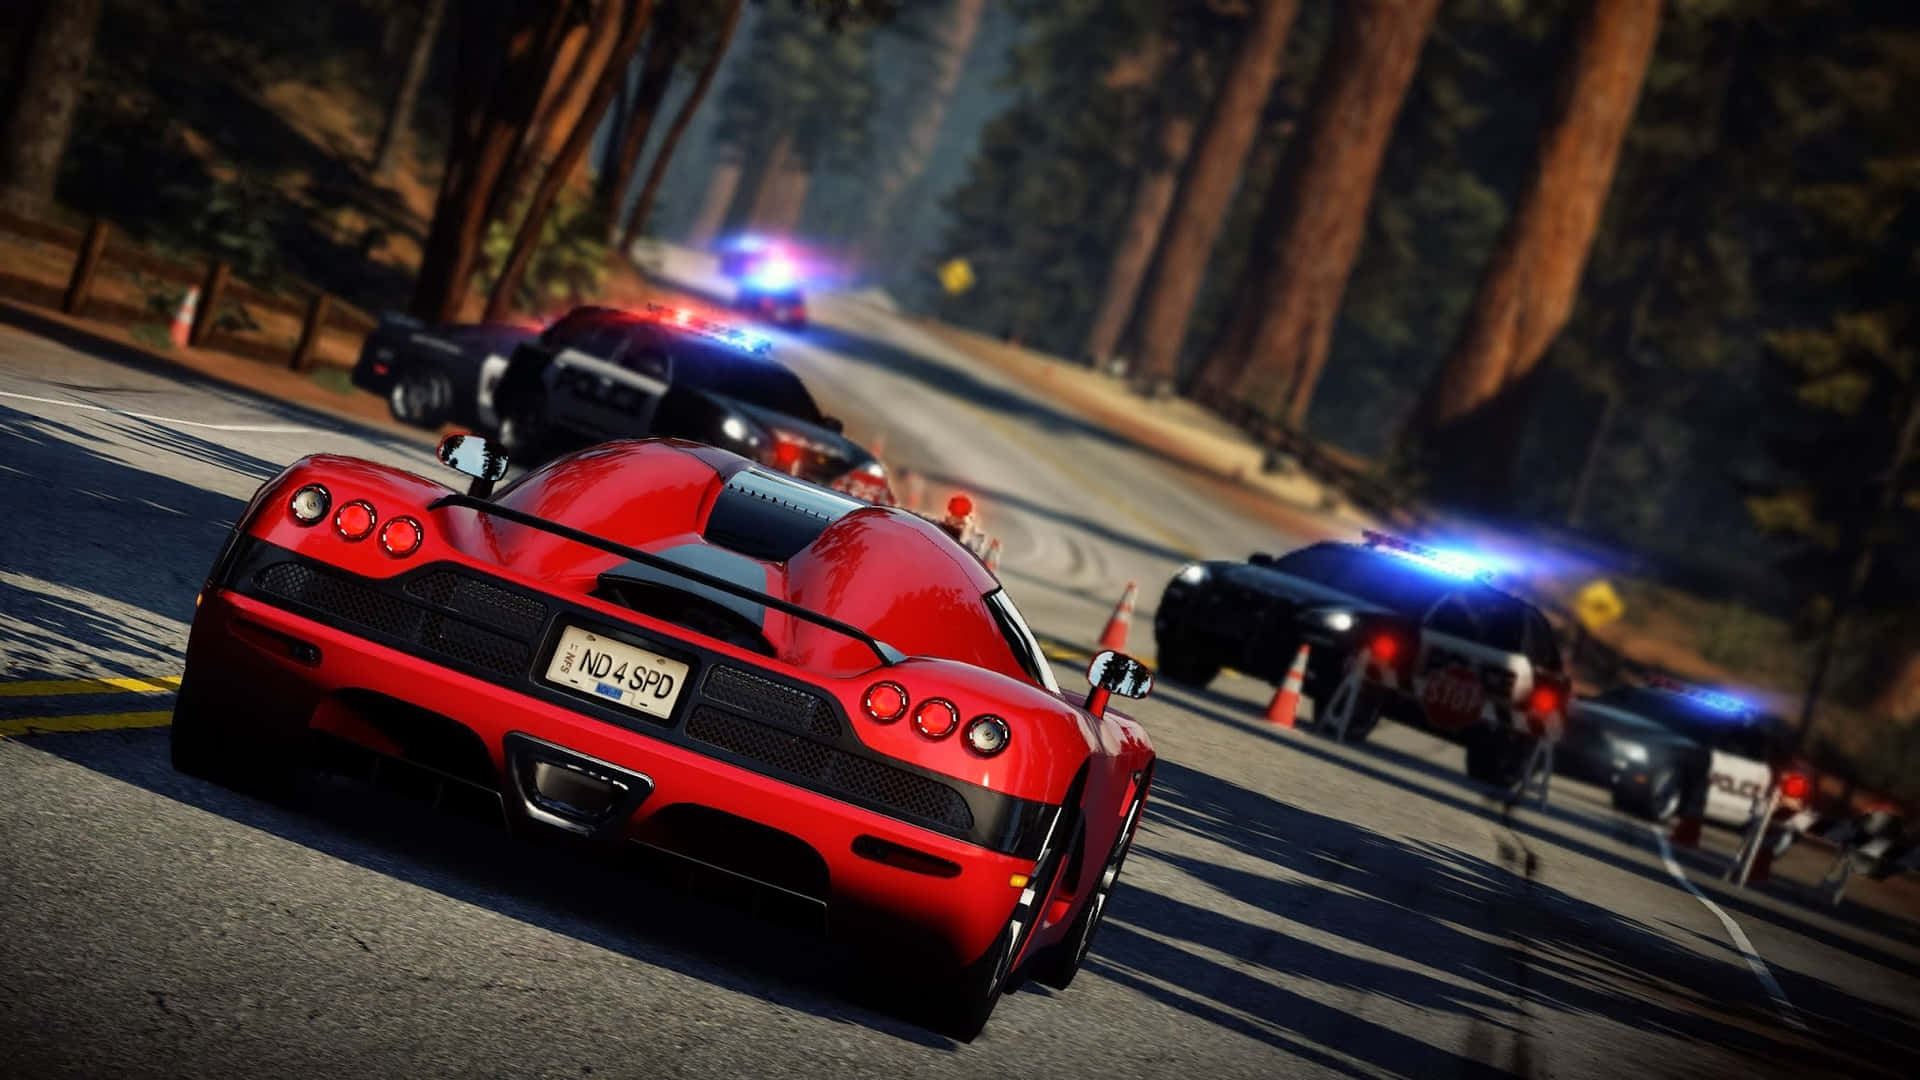 Videospielhot Pursuit Need For Speed Pc Poster Wallpaper